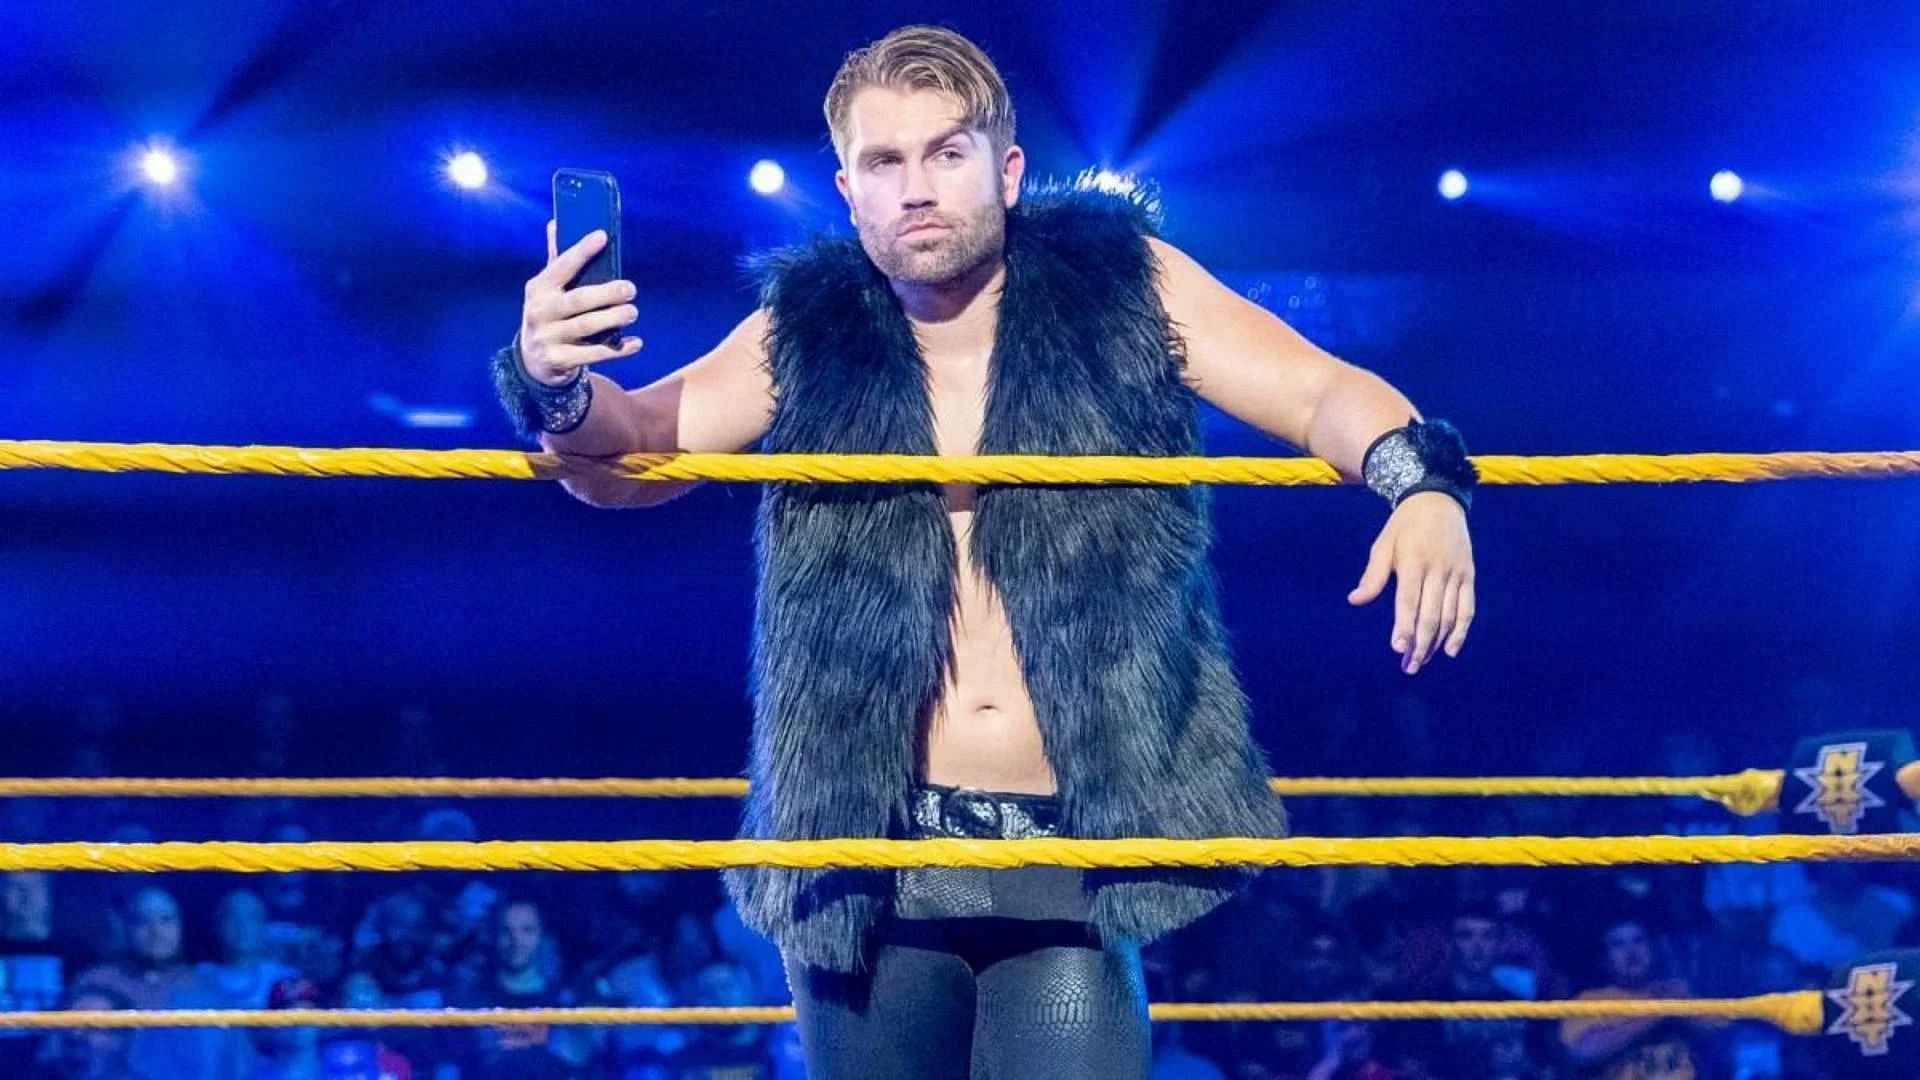 Former WWE Superstar Tyler Breeze appeared to be on his way to the top